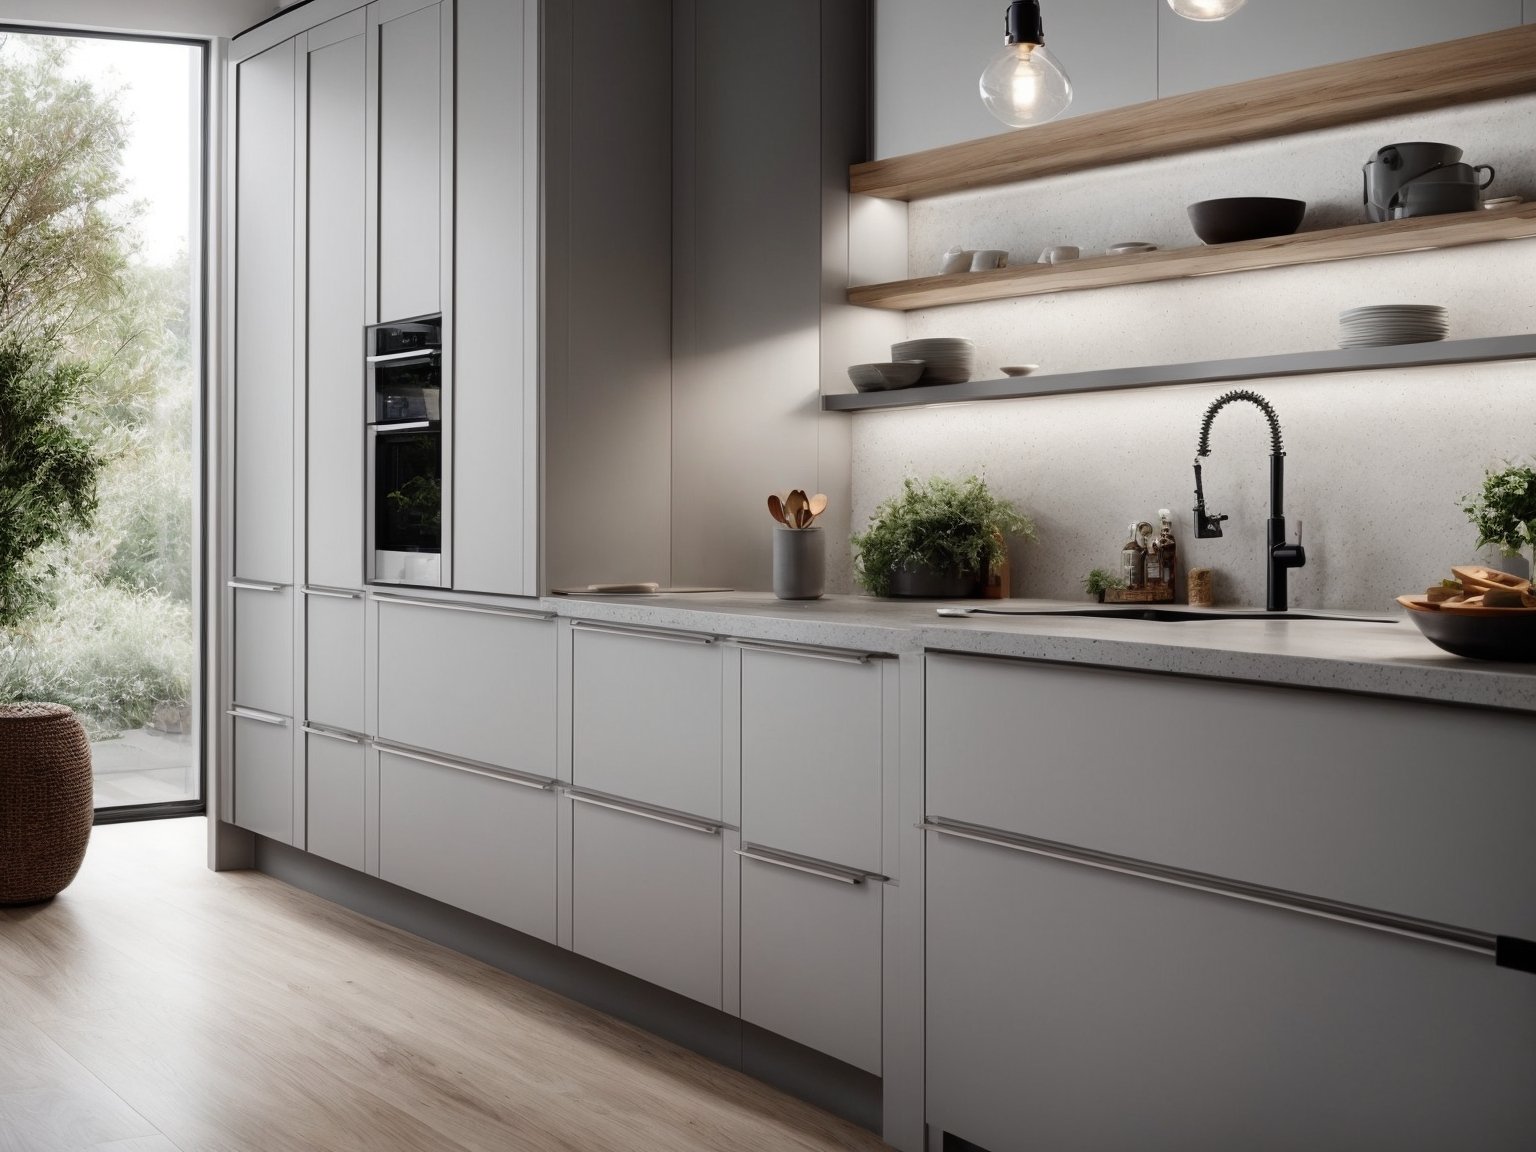 An image of light grey kitchen cabinets with a marble backsplash and pendant lighting